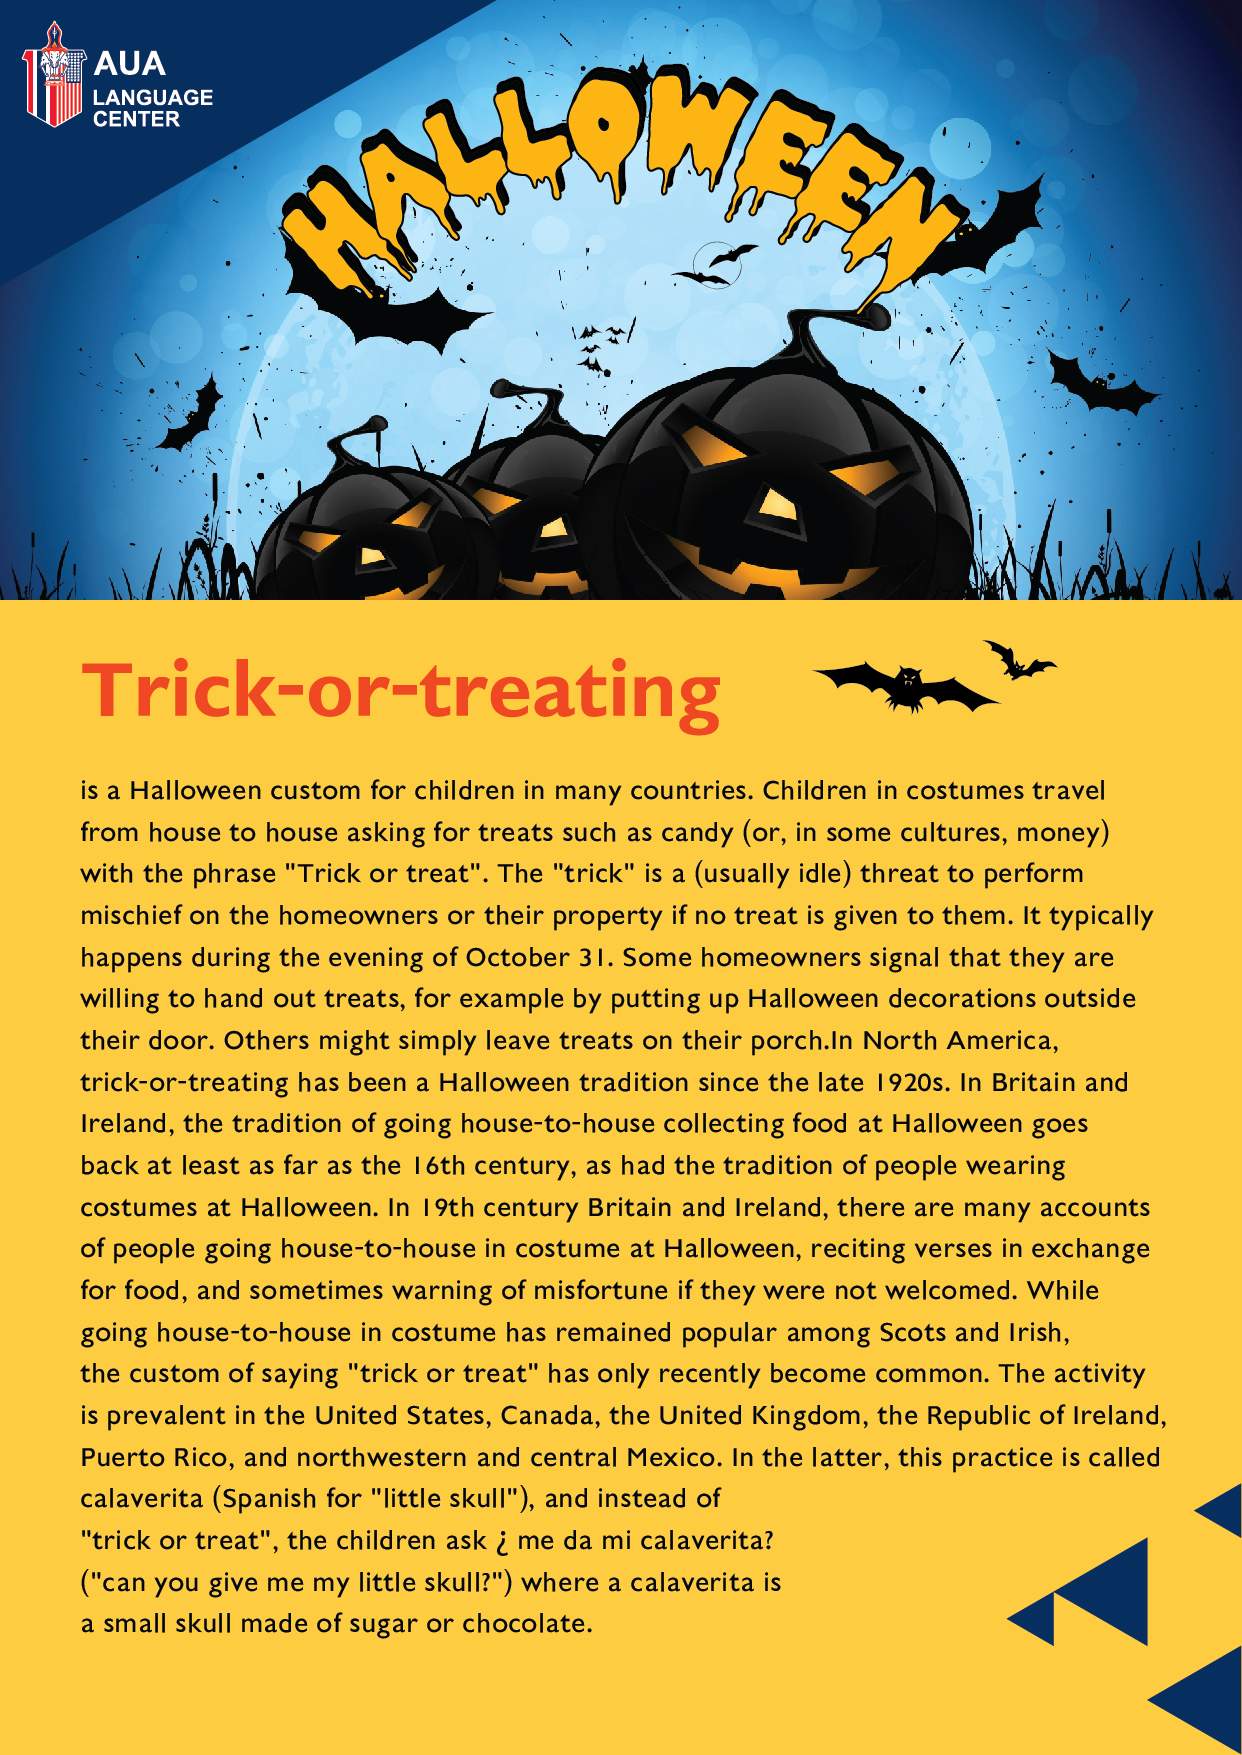 How much do you know about the history of Halloween?